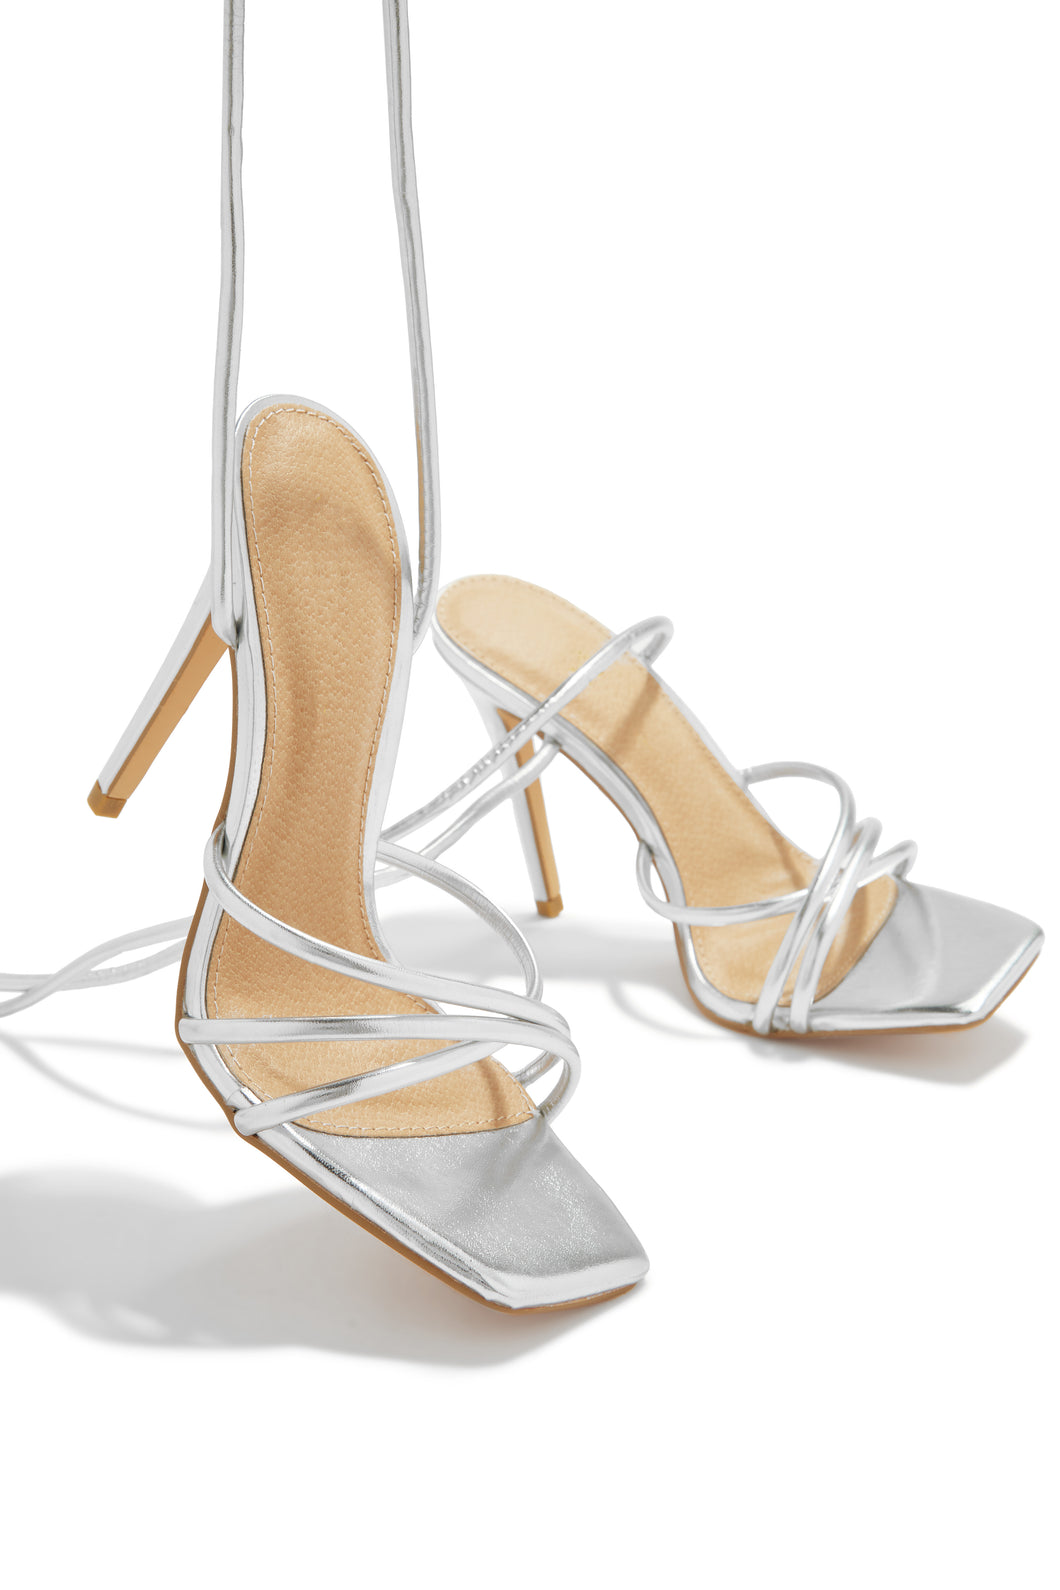 Silver-Tone Lace Up Heels with Open Square Toe